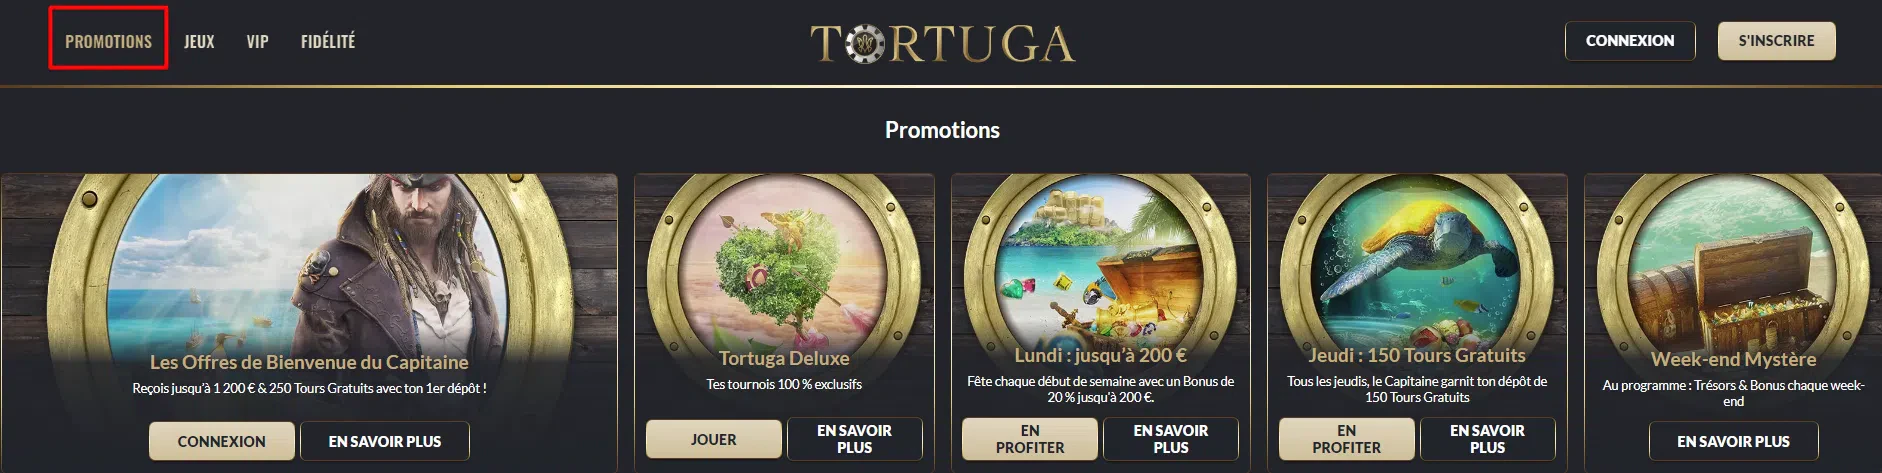 Promotions Tortuga